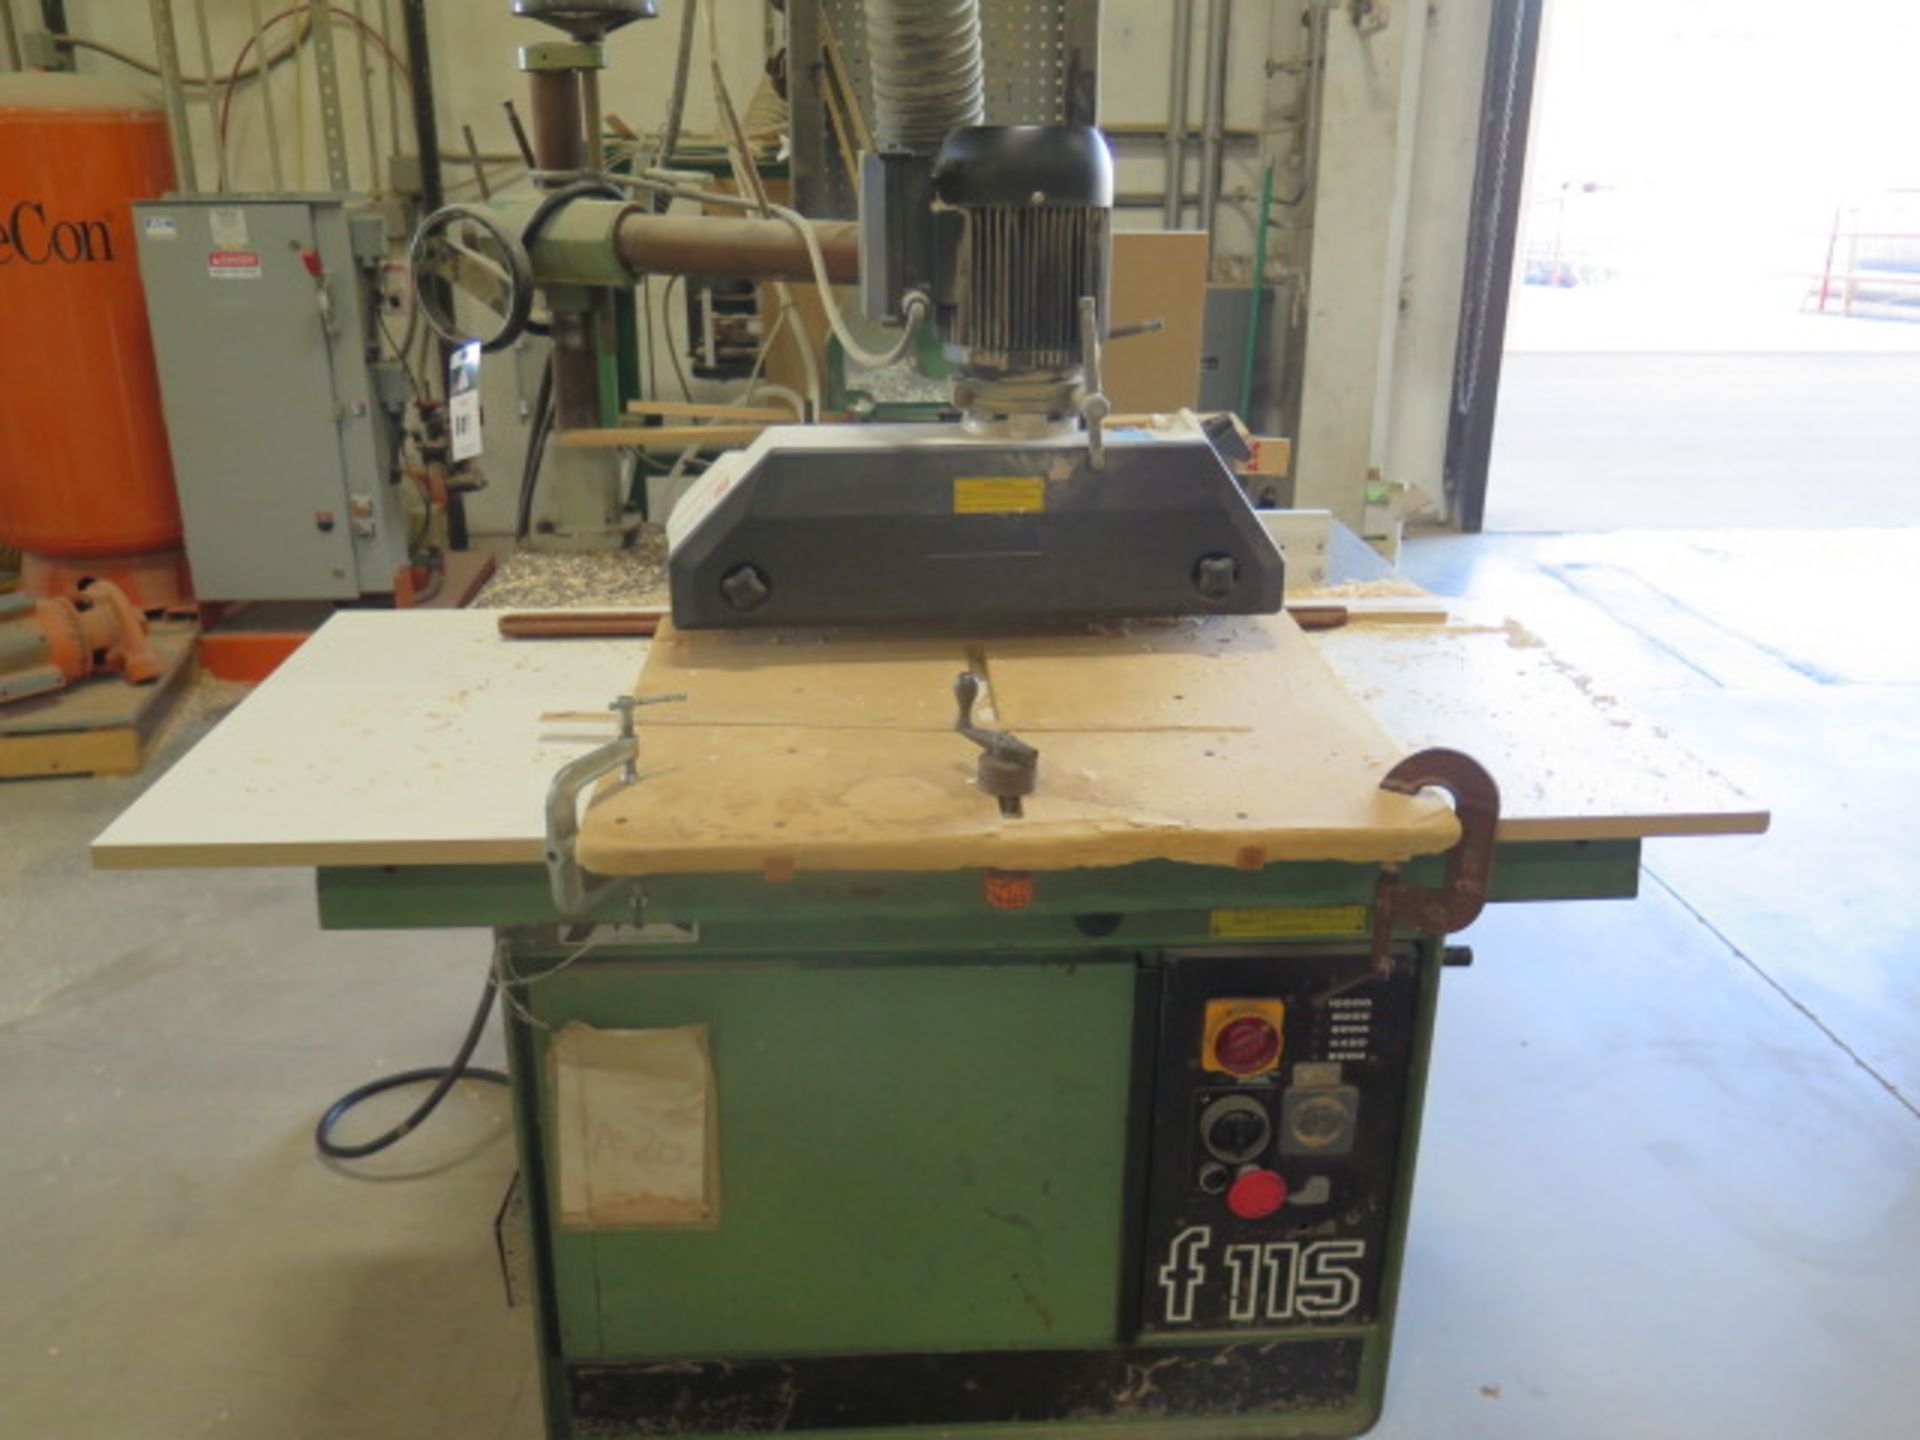 Casadei F-115 Spindle Shaper s/n 84-43-164 w/2900-10,000 RPM, 5-Spd, 4-Roll Power Feeder, SOLD AS IS